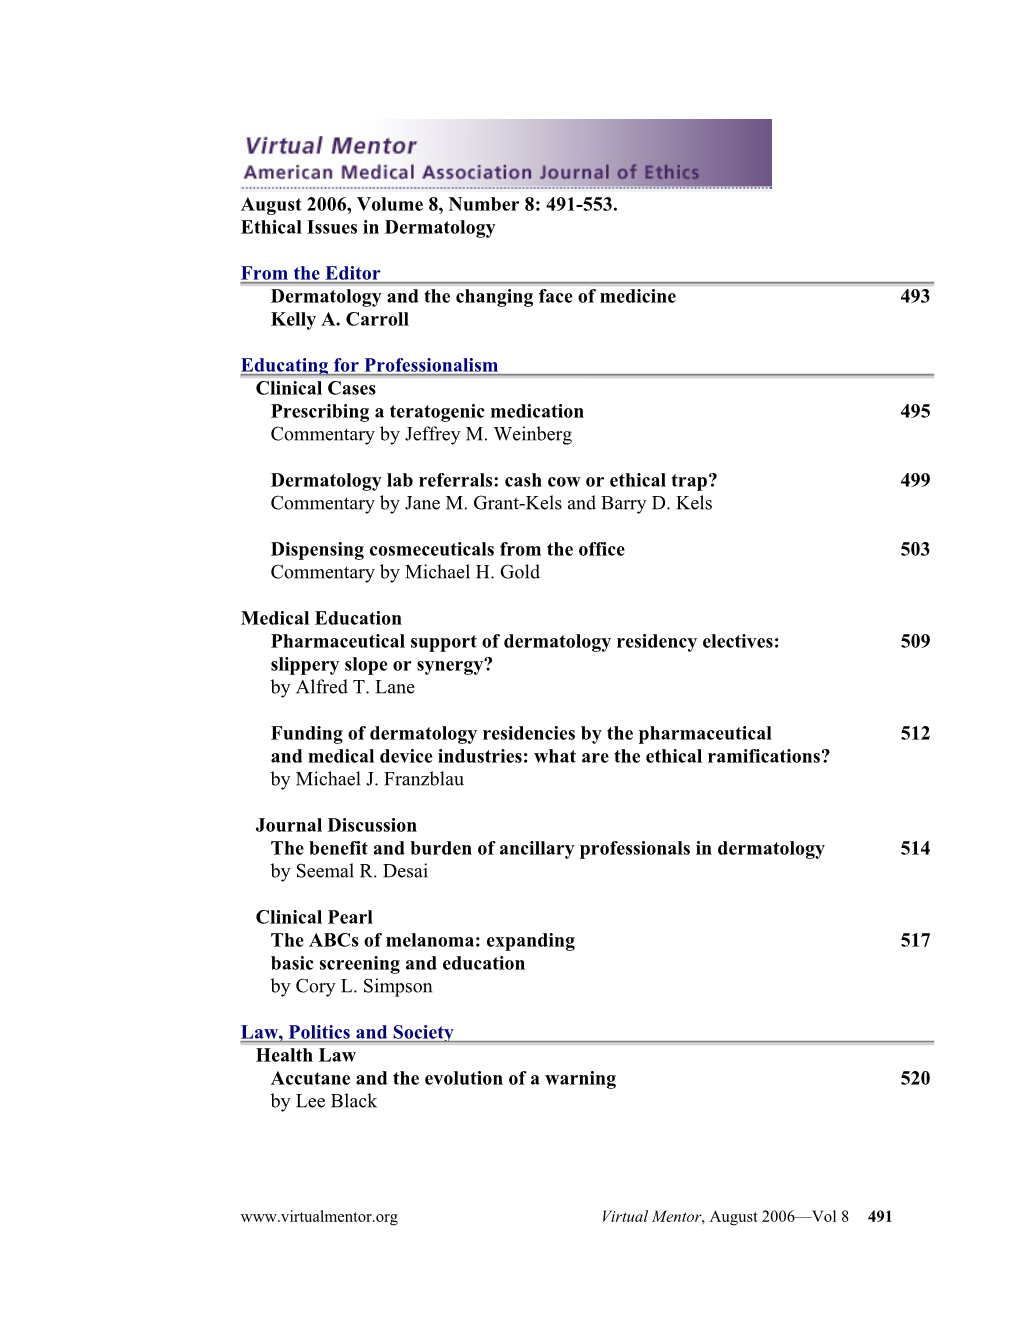 August 2006, Volume 8, Number 8: 491-553. Ethical Issues in Dermatology